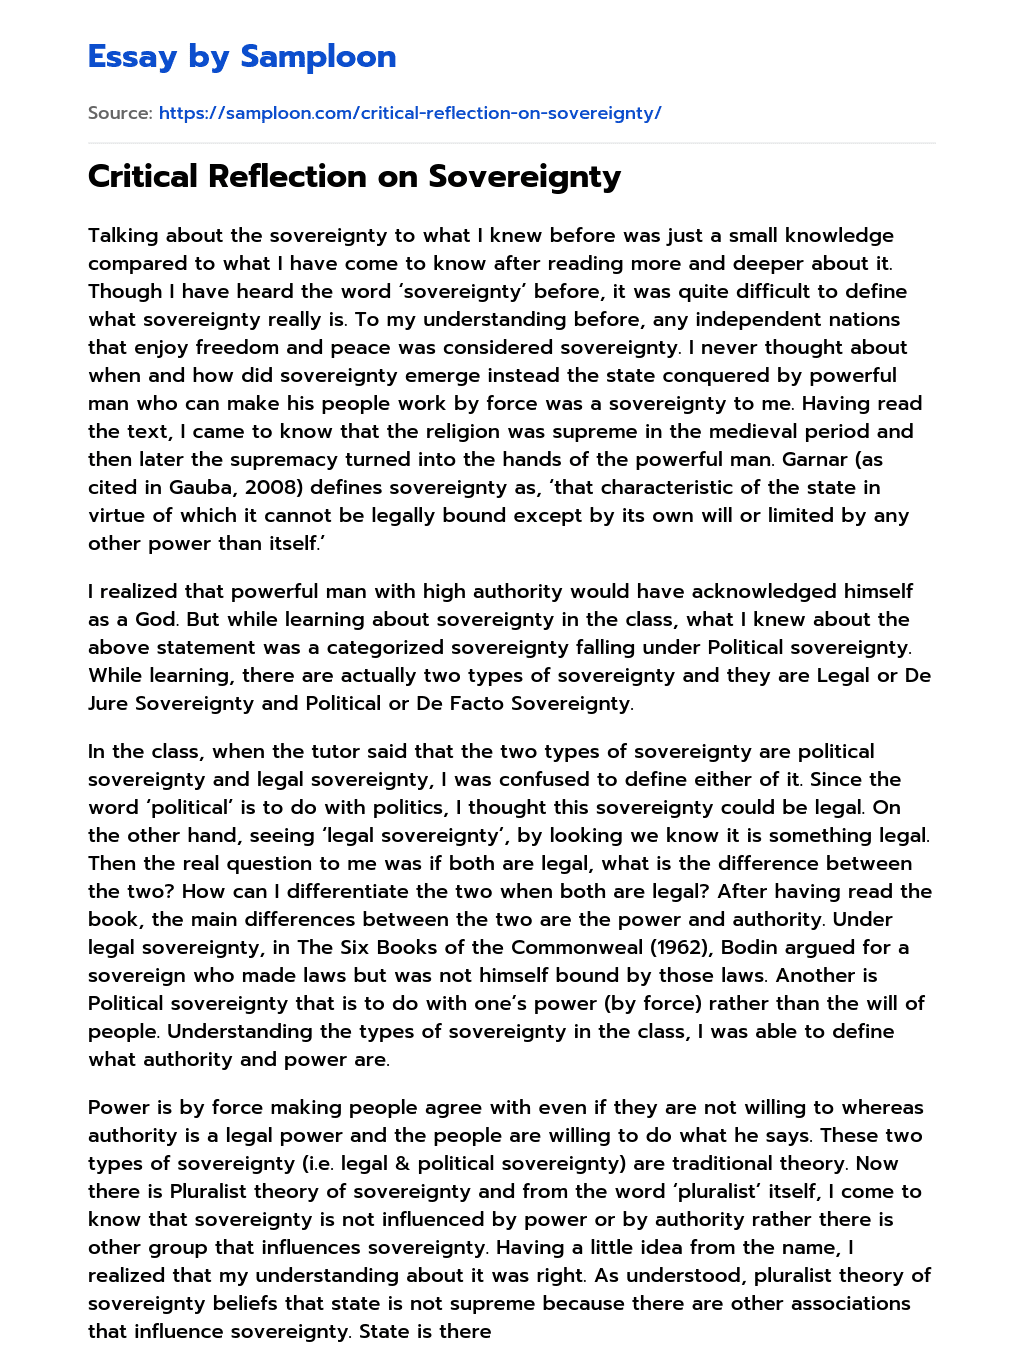 Critical Reflection on Sovereignty essay